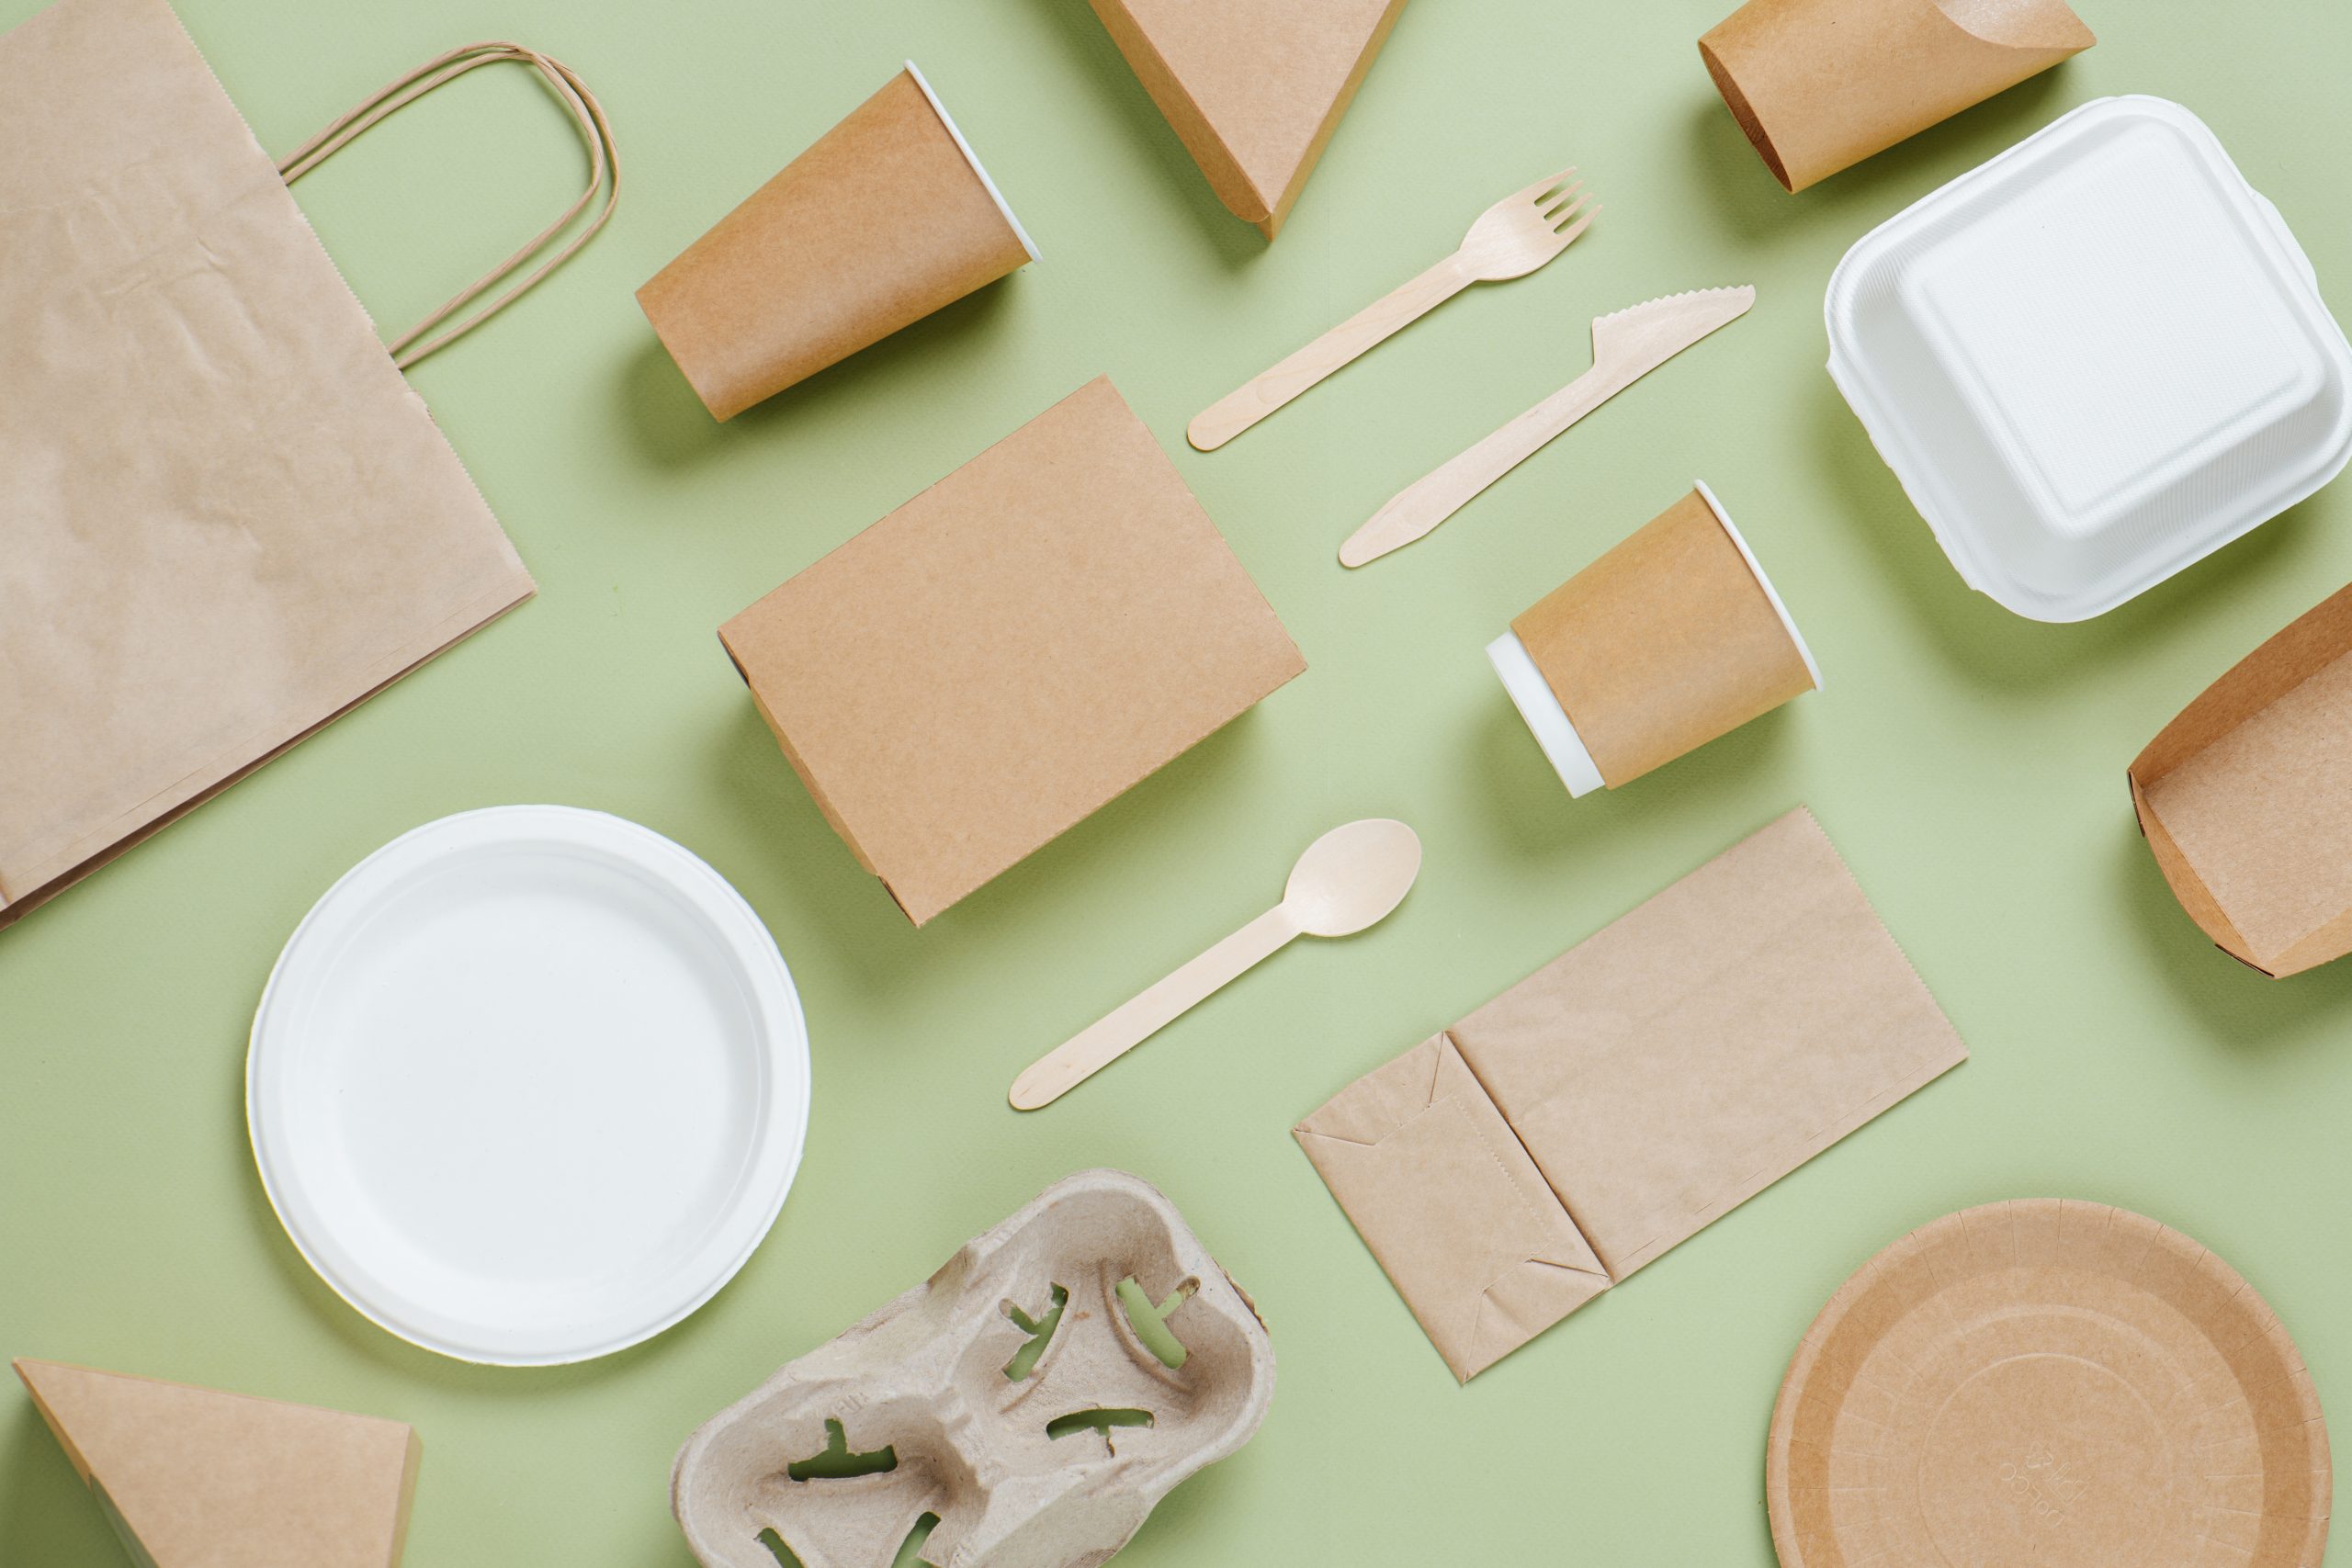 Eco-friendly disposable utensils made of bamboo wood and paper on a green background. Draped spoons, fork, knives, bamboo bowls with paper cups and packet